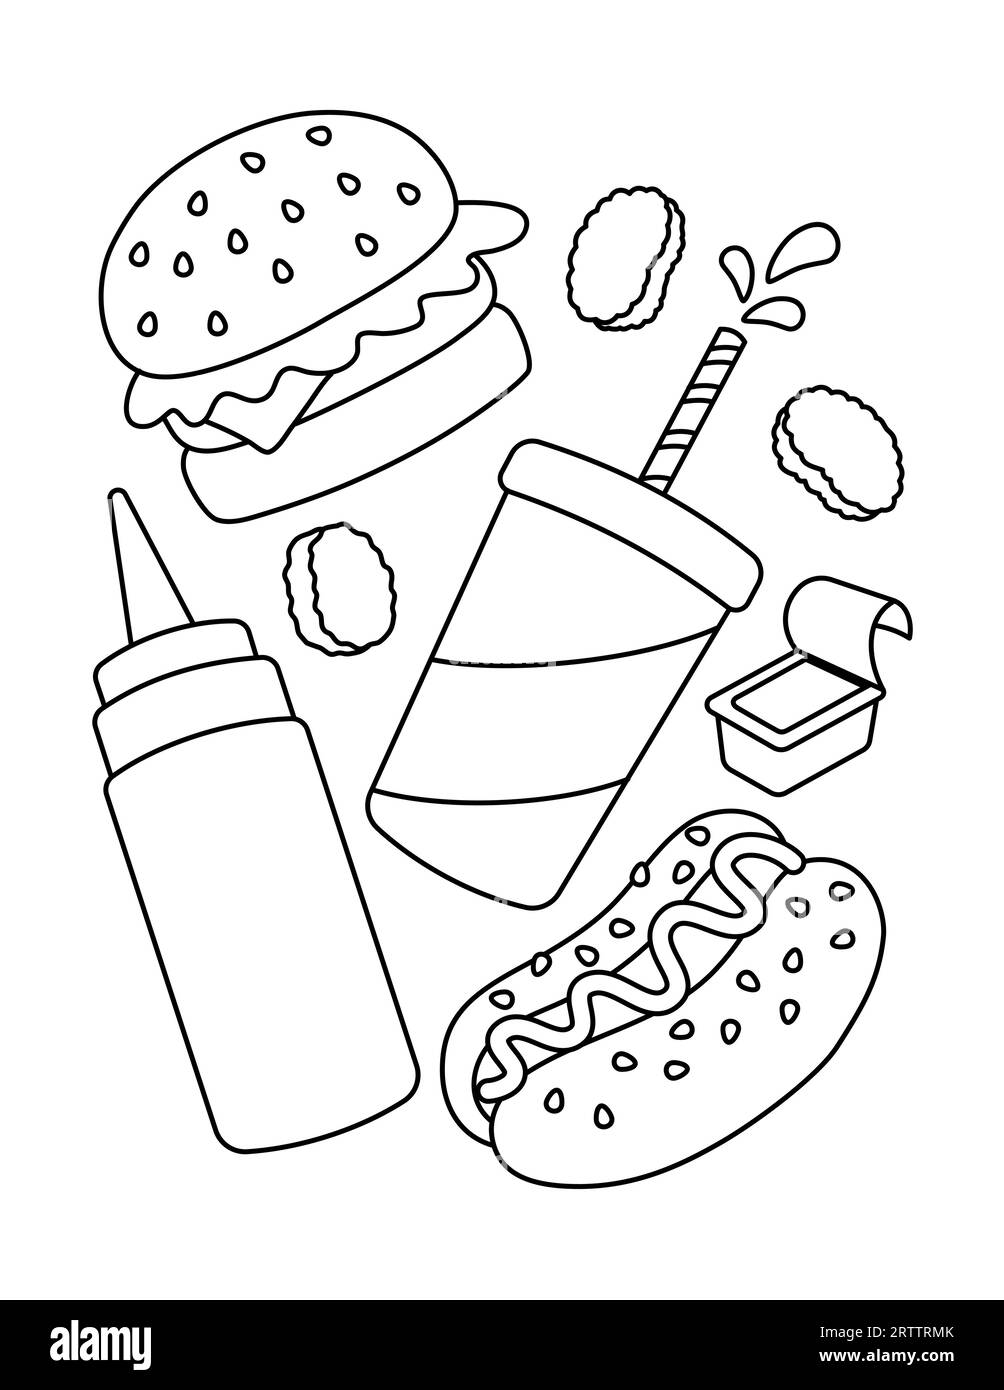 Cute Fast Food Theme Coloring Page Stock Vector